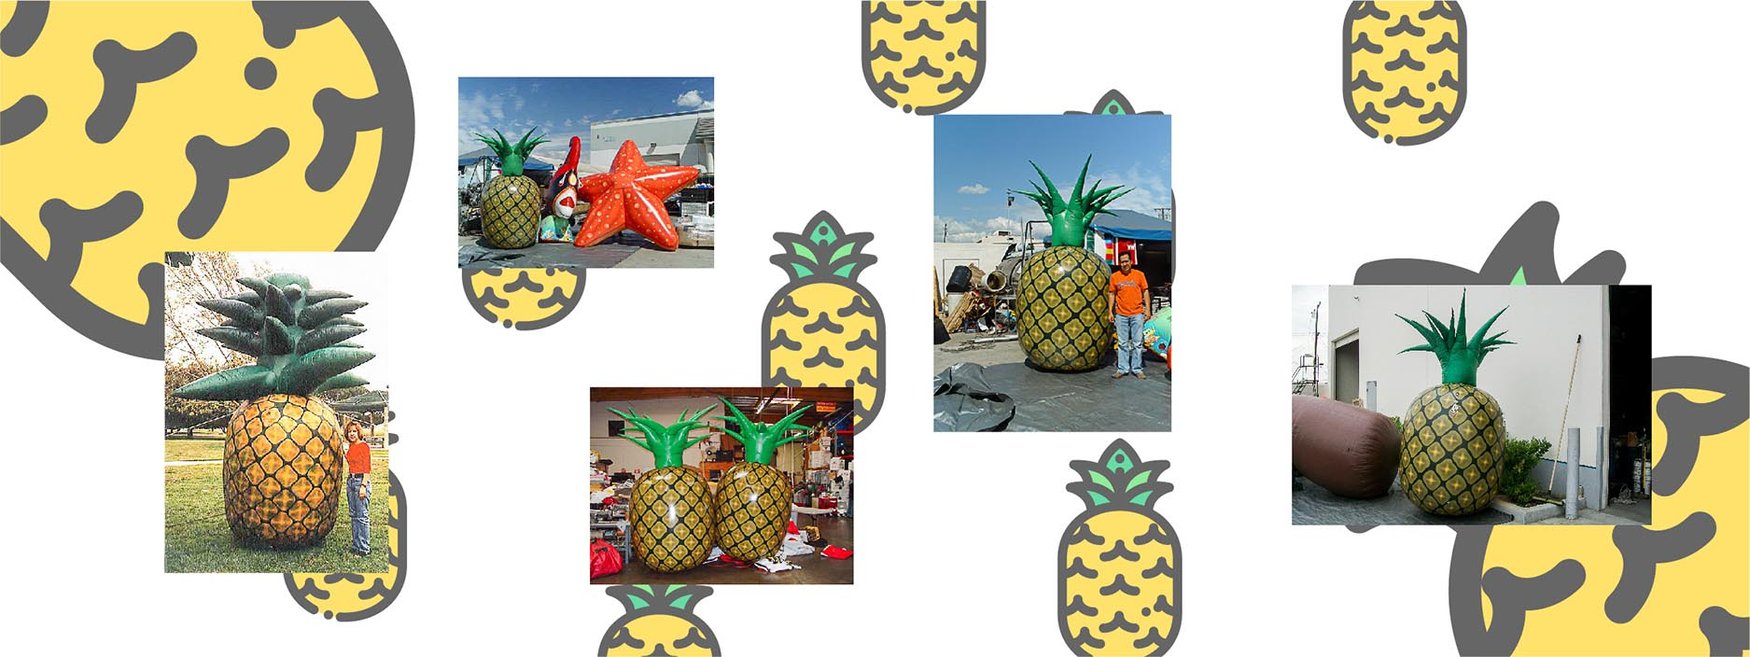 Inflatable-pineapple-collage.jpg